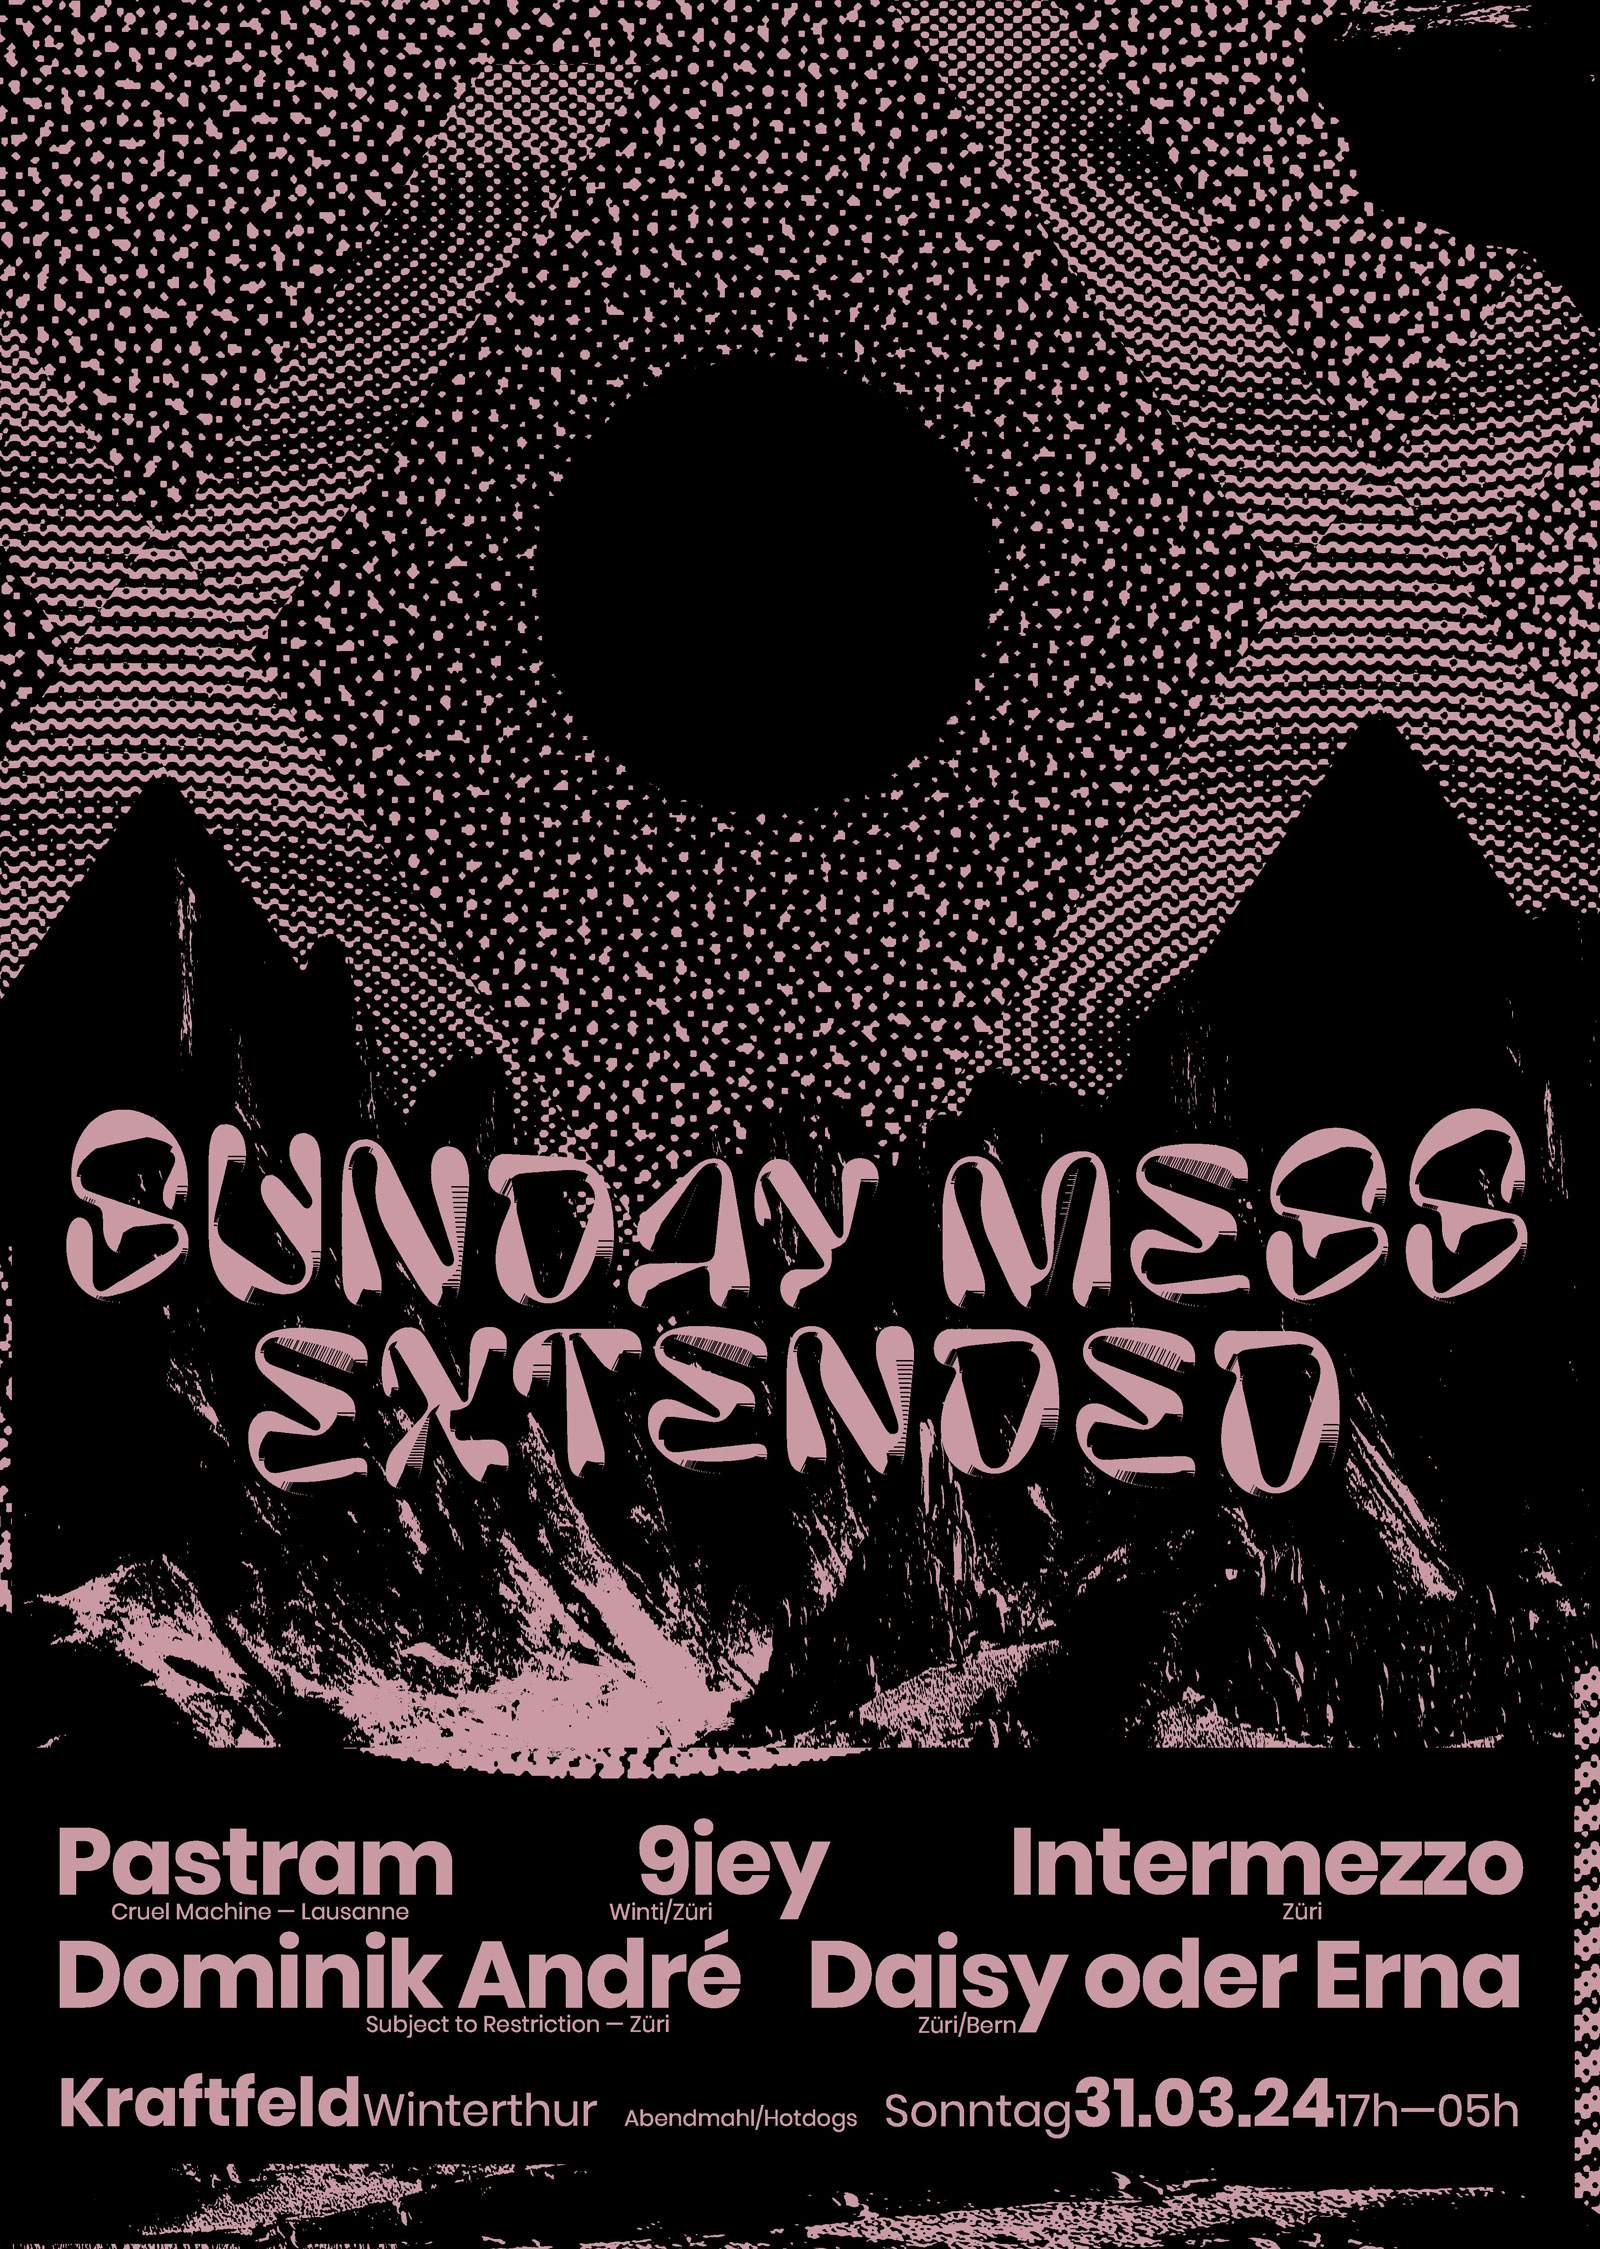 SUNDAY MESS EXTENDED - フライヤー表